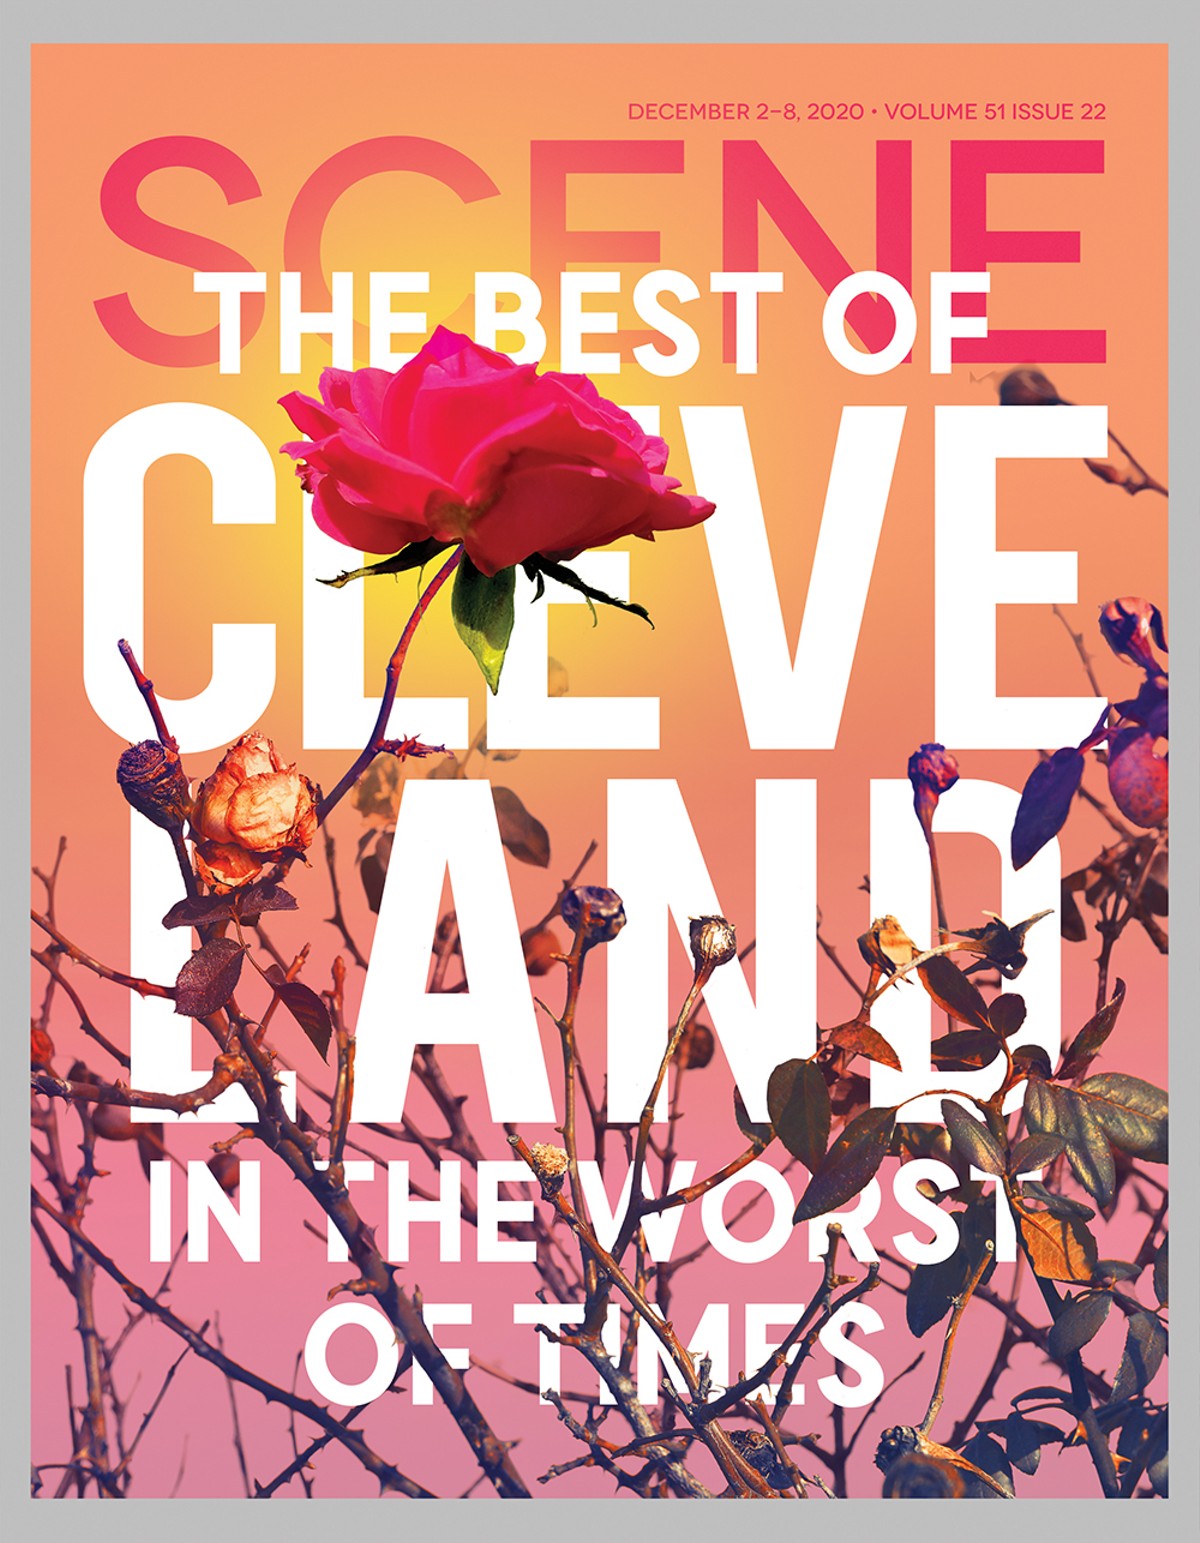 Best of Cleveland 2020 Issue Cover